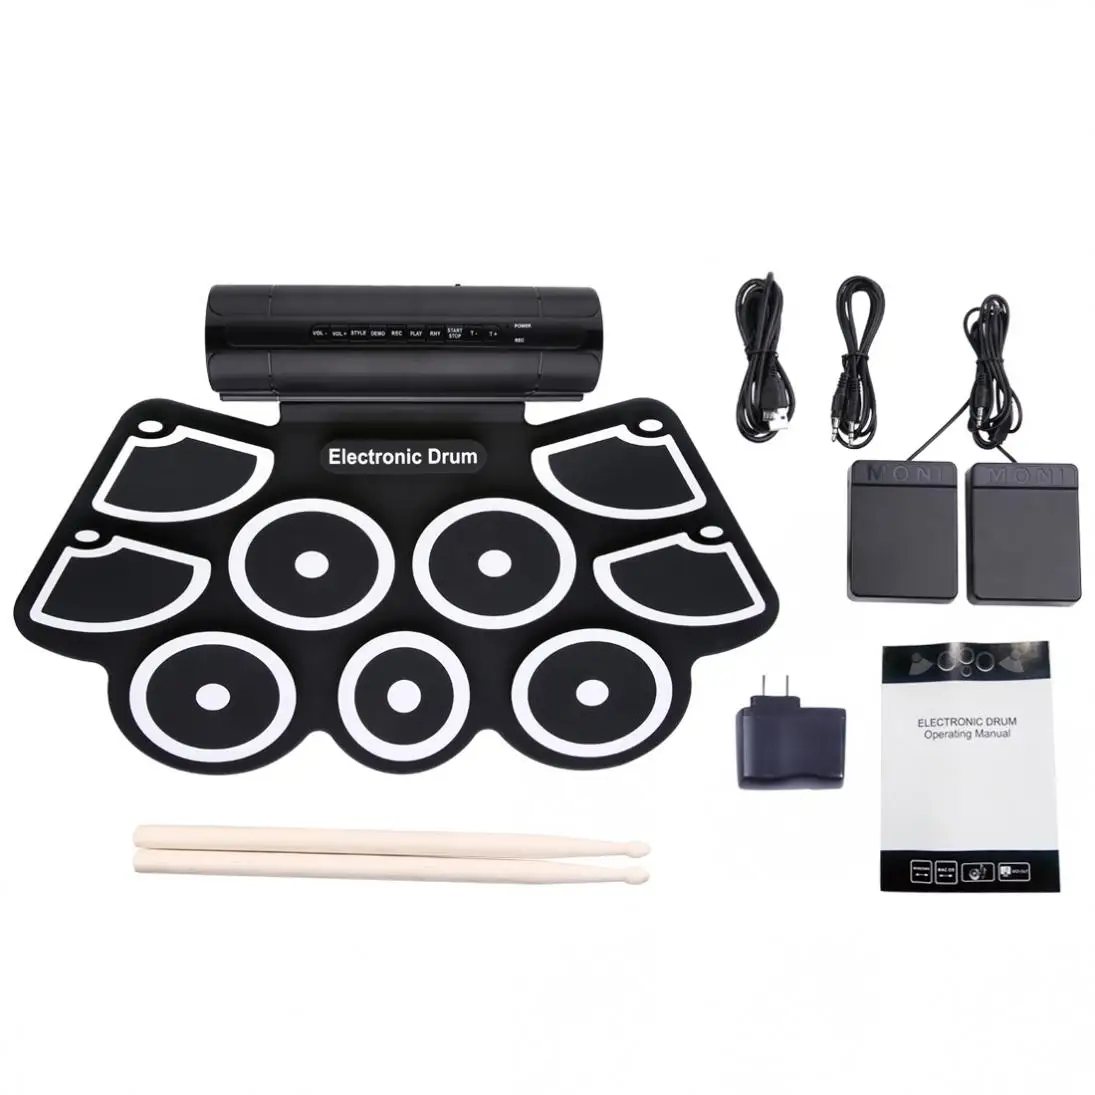 Portable Roll Up Electronic Drum Set 9 Silicon Pads Built-in Speakers with Drumsticks Foot Pedals Support USB